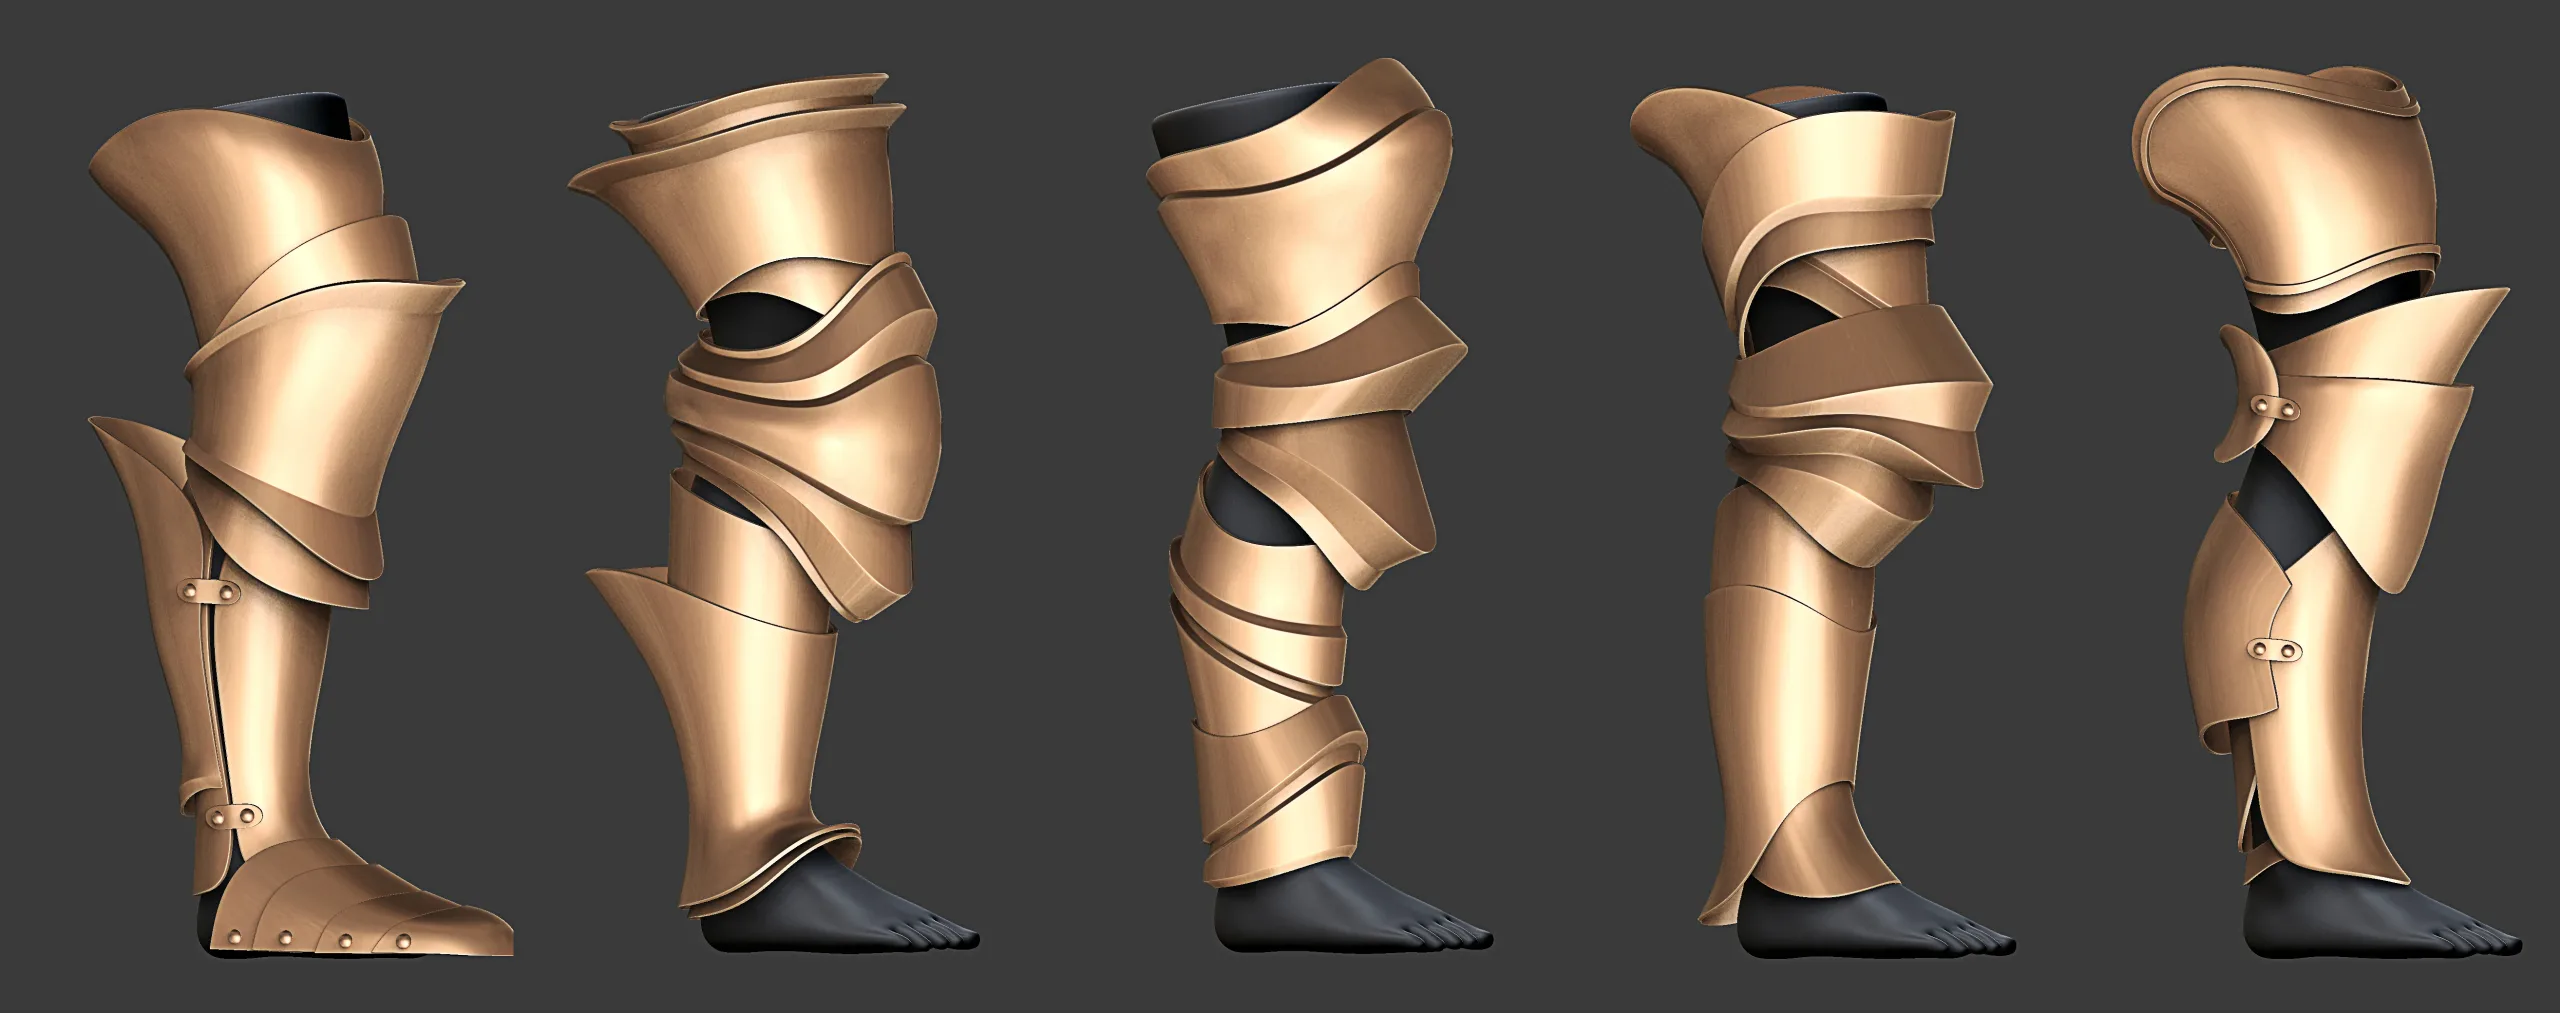 Leg Armor Highpoly and Lowpoly (With UVs) Vol 2